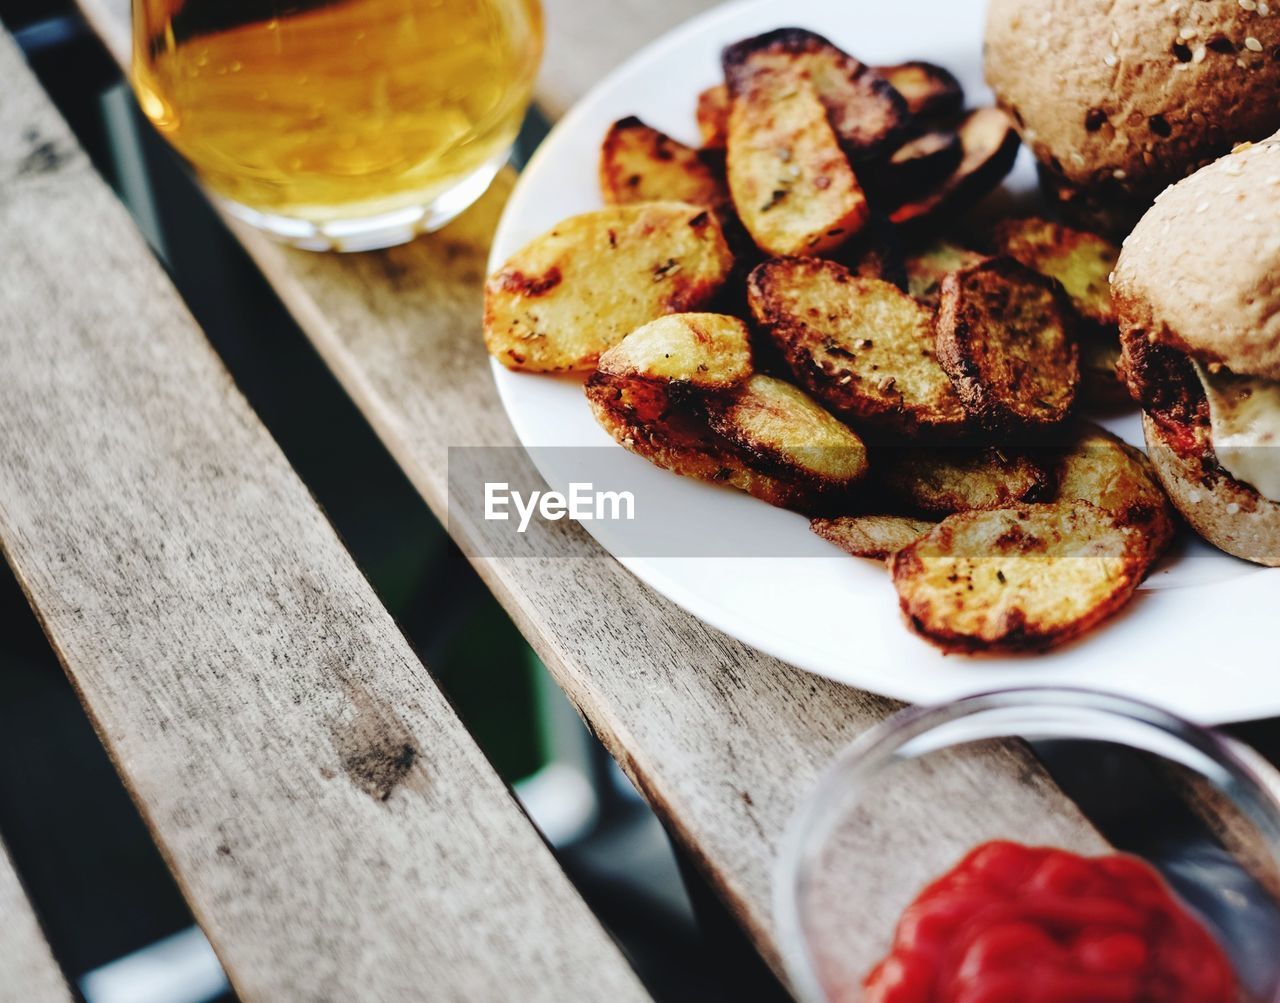 High angle view of prepared potatoes with burgers and beer on table